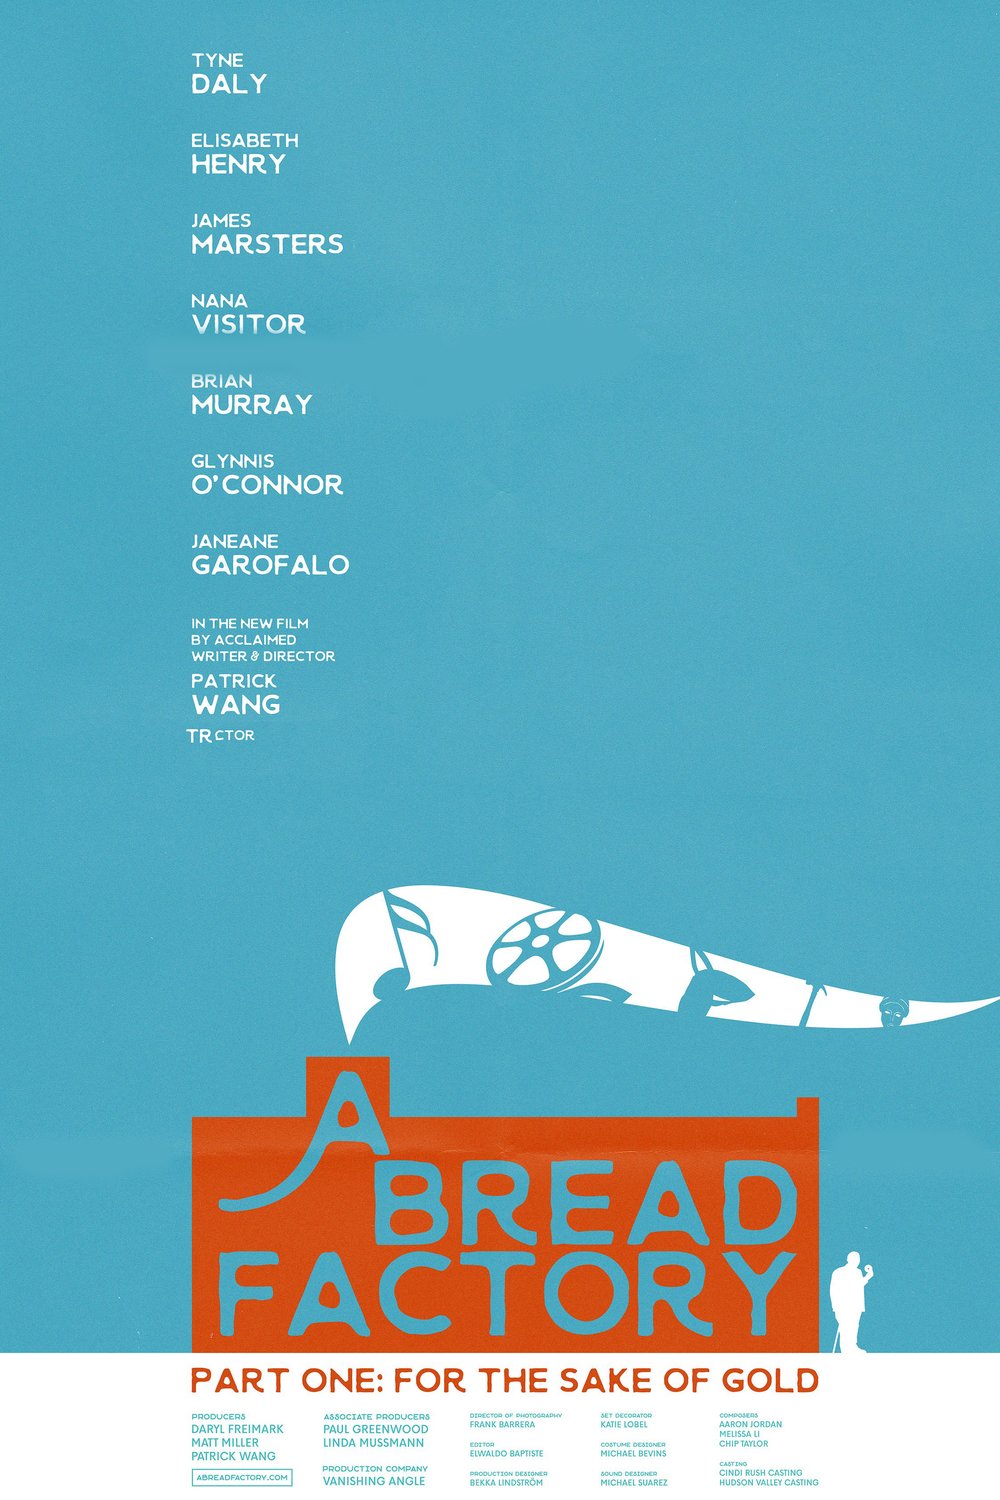 Poster of the movie A Bread Factory, Part One